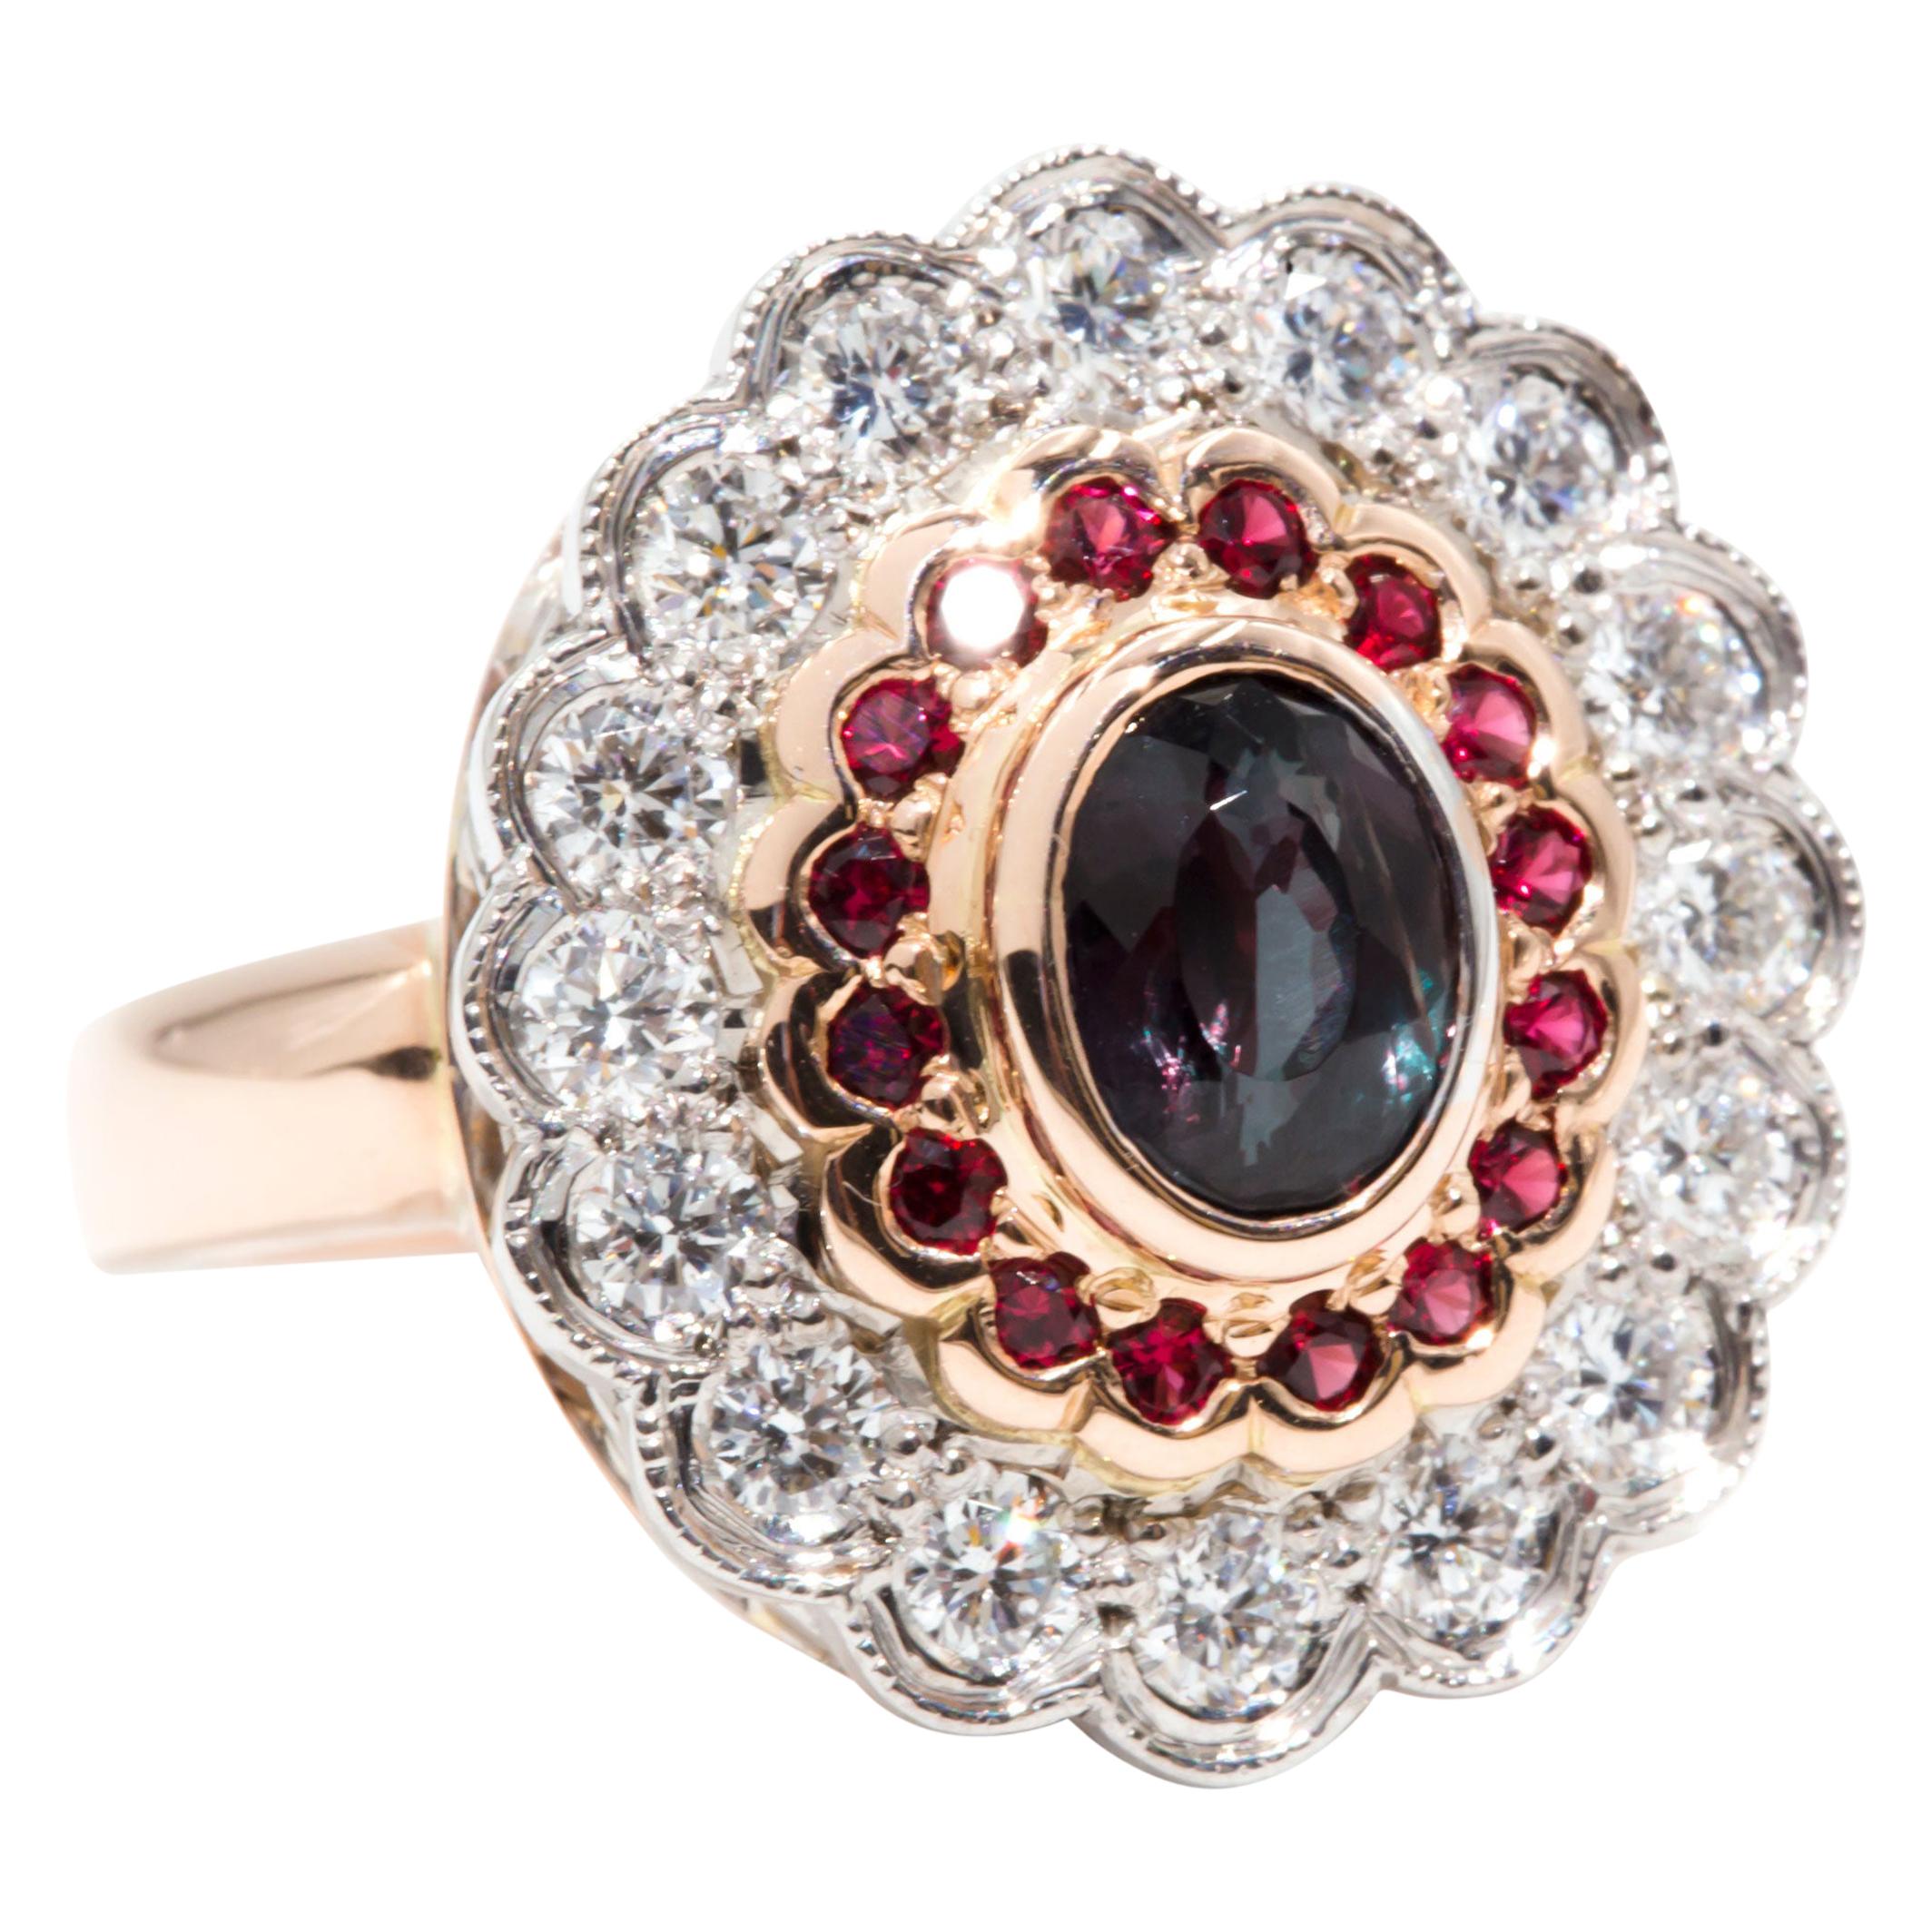 1.24 Carat Alexandrite and Red Spinel and Diamond 18 Carat Gold Cocktail Ring